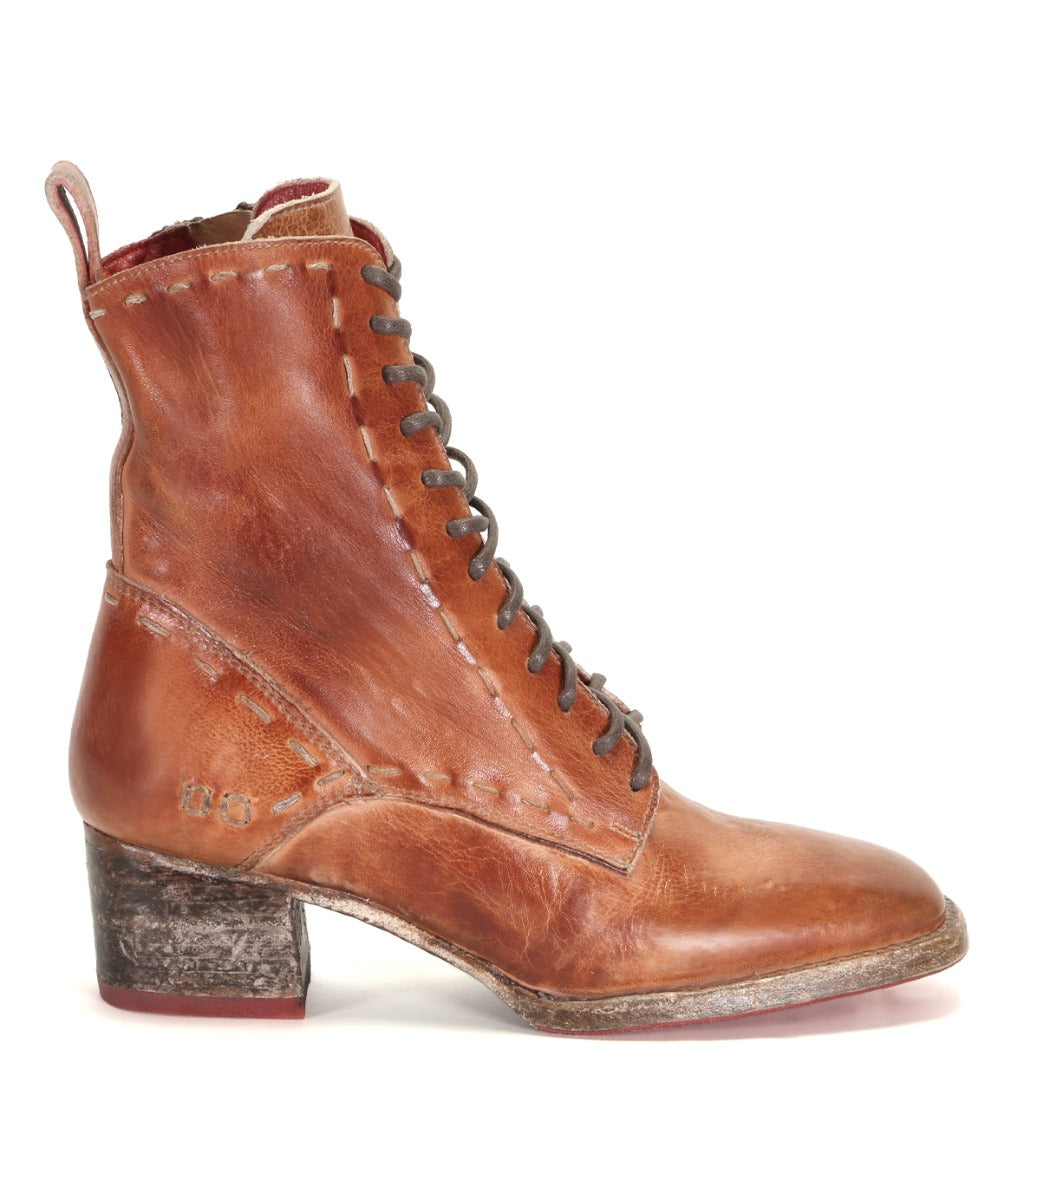 A women's Gracie tan leather ankle boot by Bed Stu.